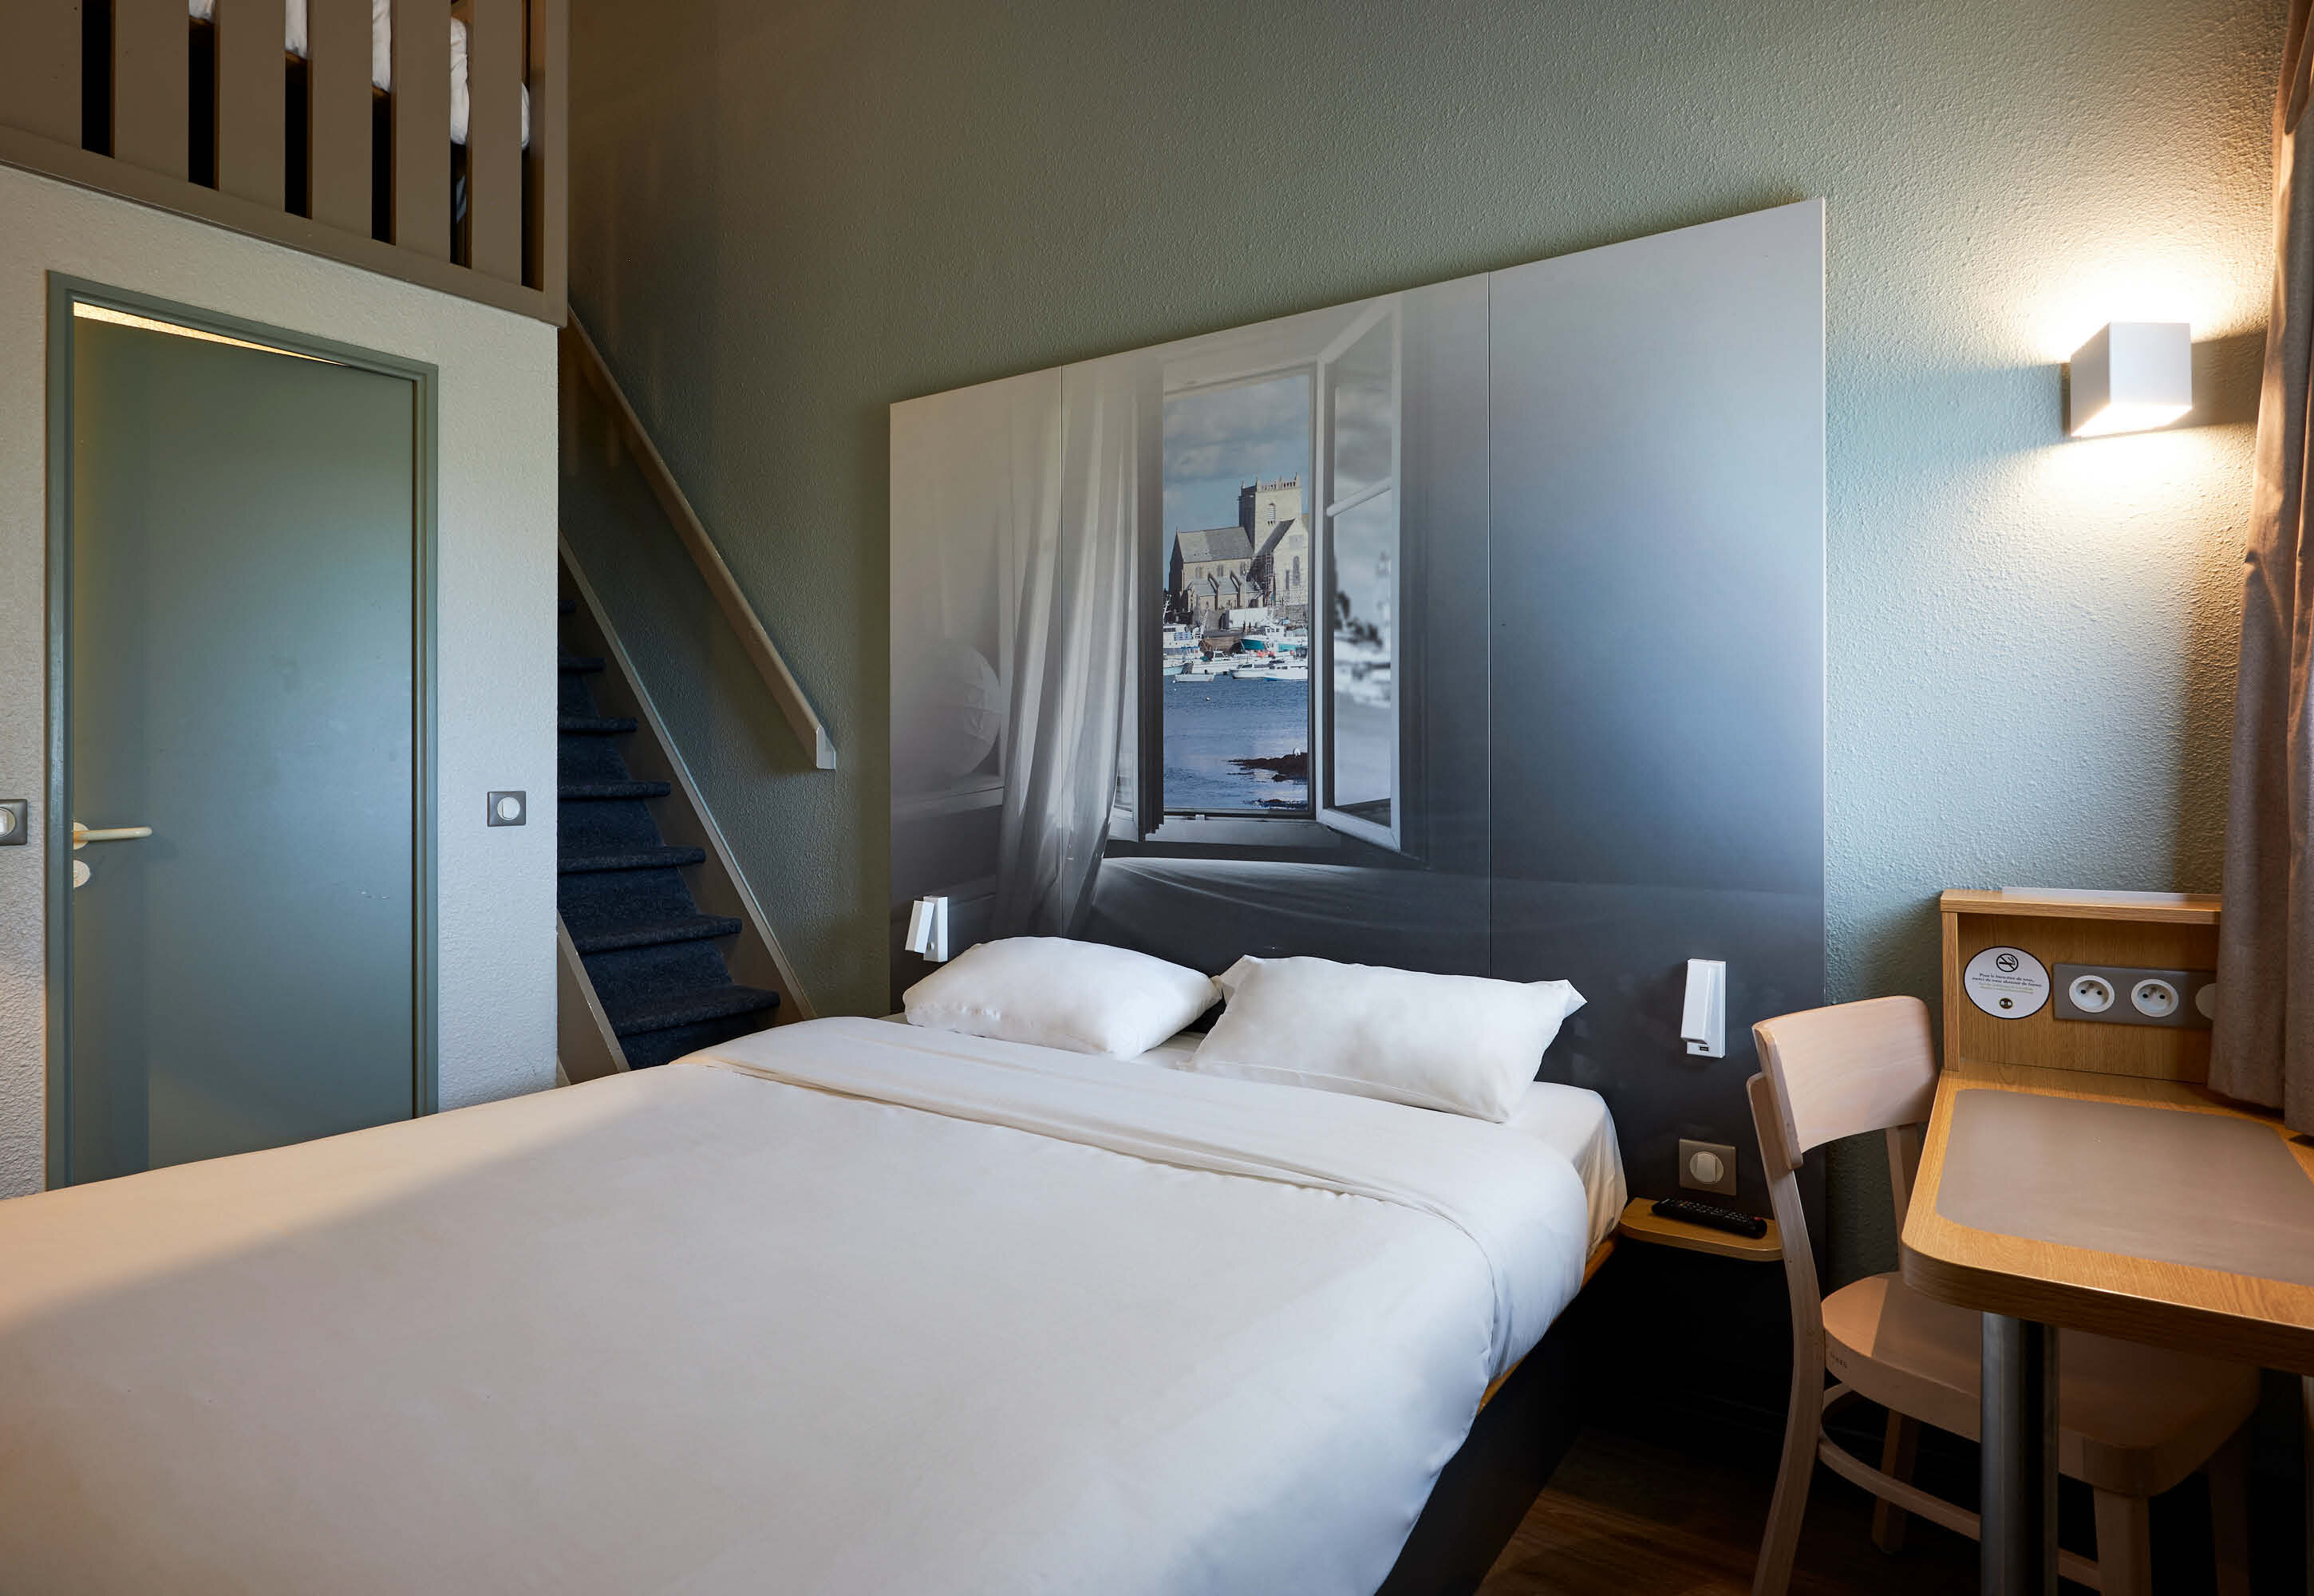 Images B&B HOTEL Cherbourg